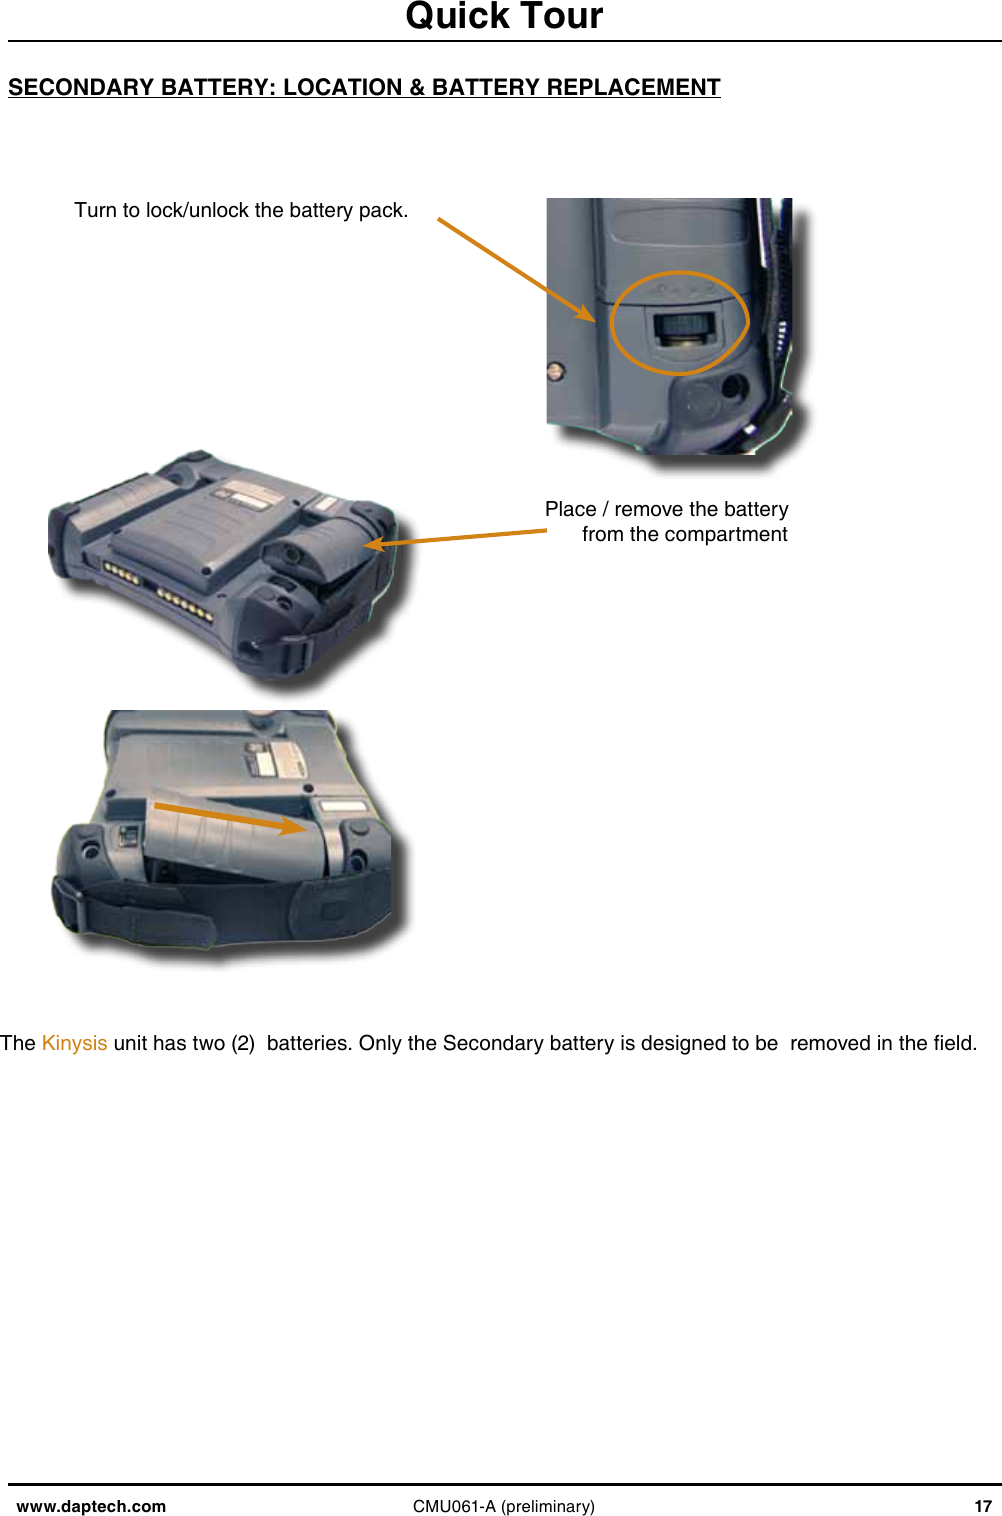 www.daptech.com CMU061-A (preliminary) 17Quick TourSECONDARY BATTERY: LOCATION &amp; BATTERY REPLACEMENTThe Kinysis unit has two (2)  batteries. Only the Secondary battery is designed to be  removed in the eld. Turn to lock/unlock the battery pack.Place / remove the battery from the compartment 